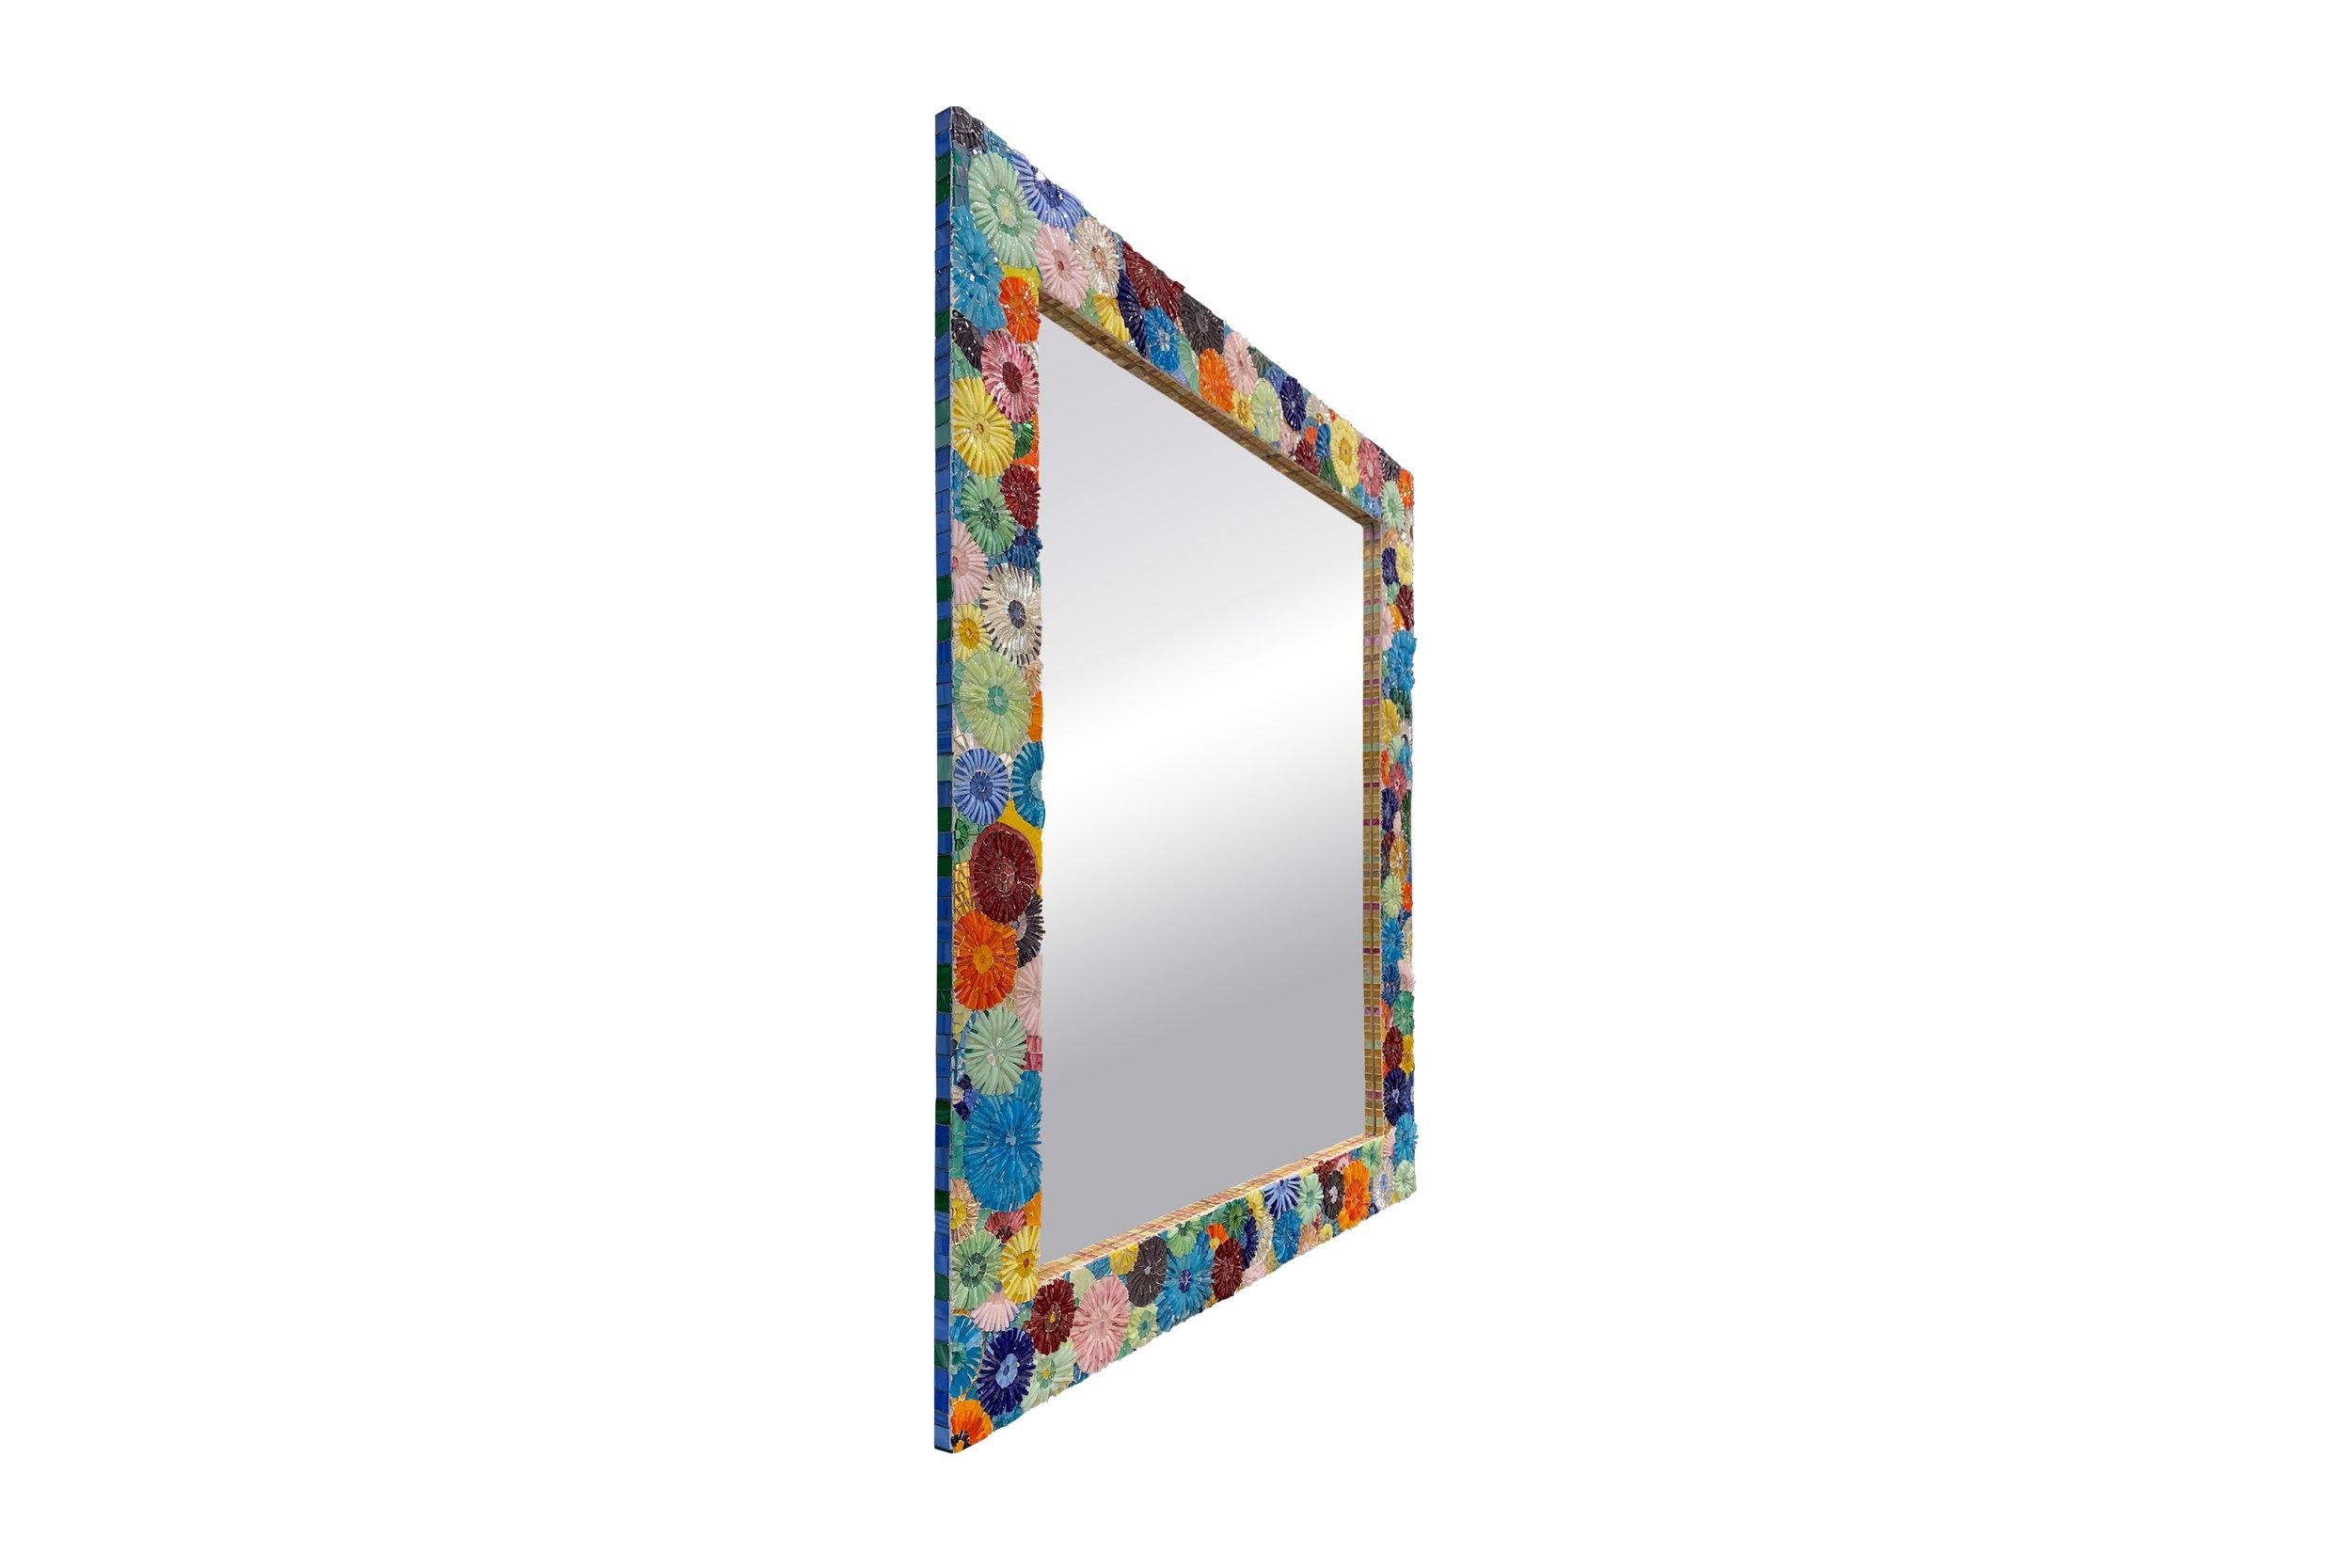 Inspired by the beaches of Brazil, the Ipanema mirror by Ercole Home is a bright, colorful, statement piece in any room. Covered in our one of a kind blossom pattern and a variety of warm saturated glass this mirror brings so much excitement to the